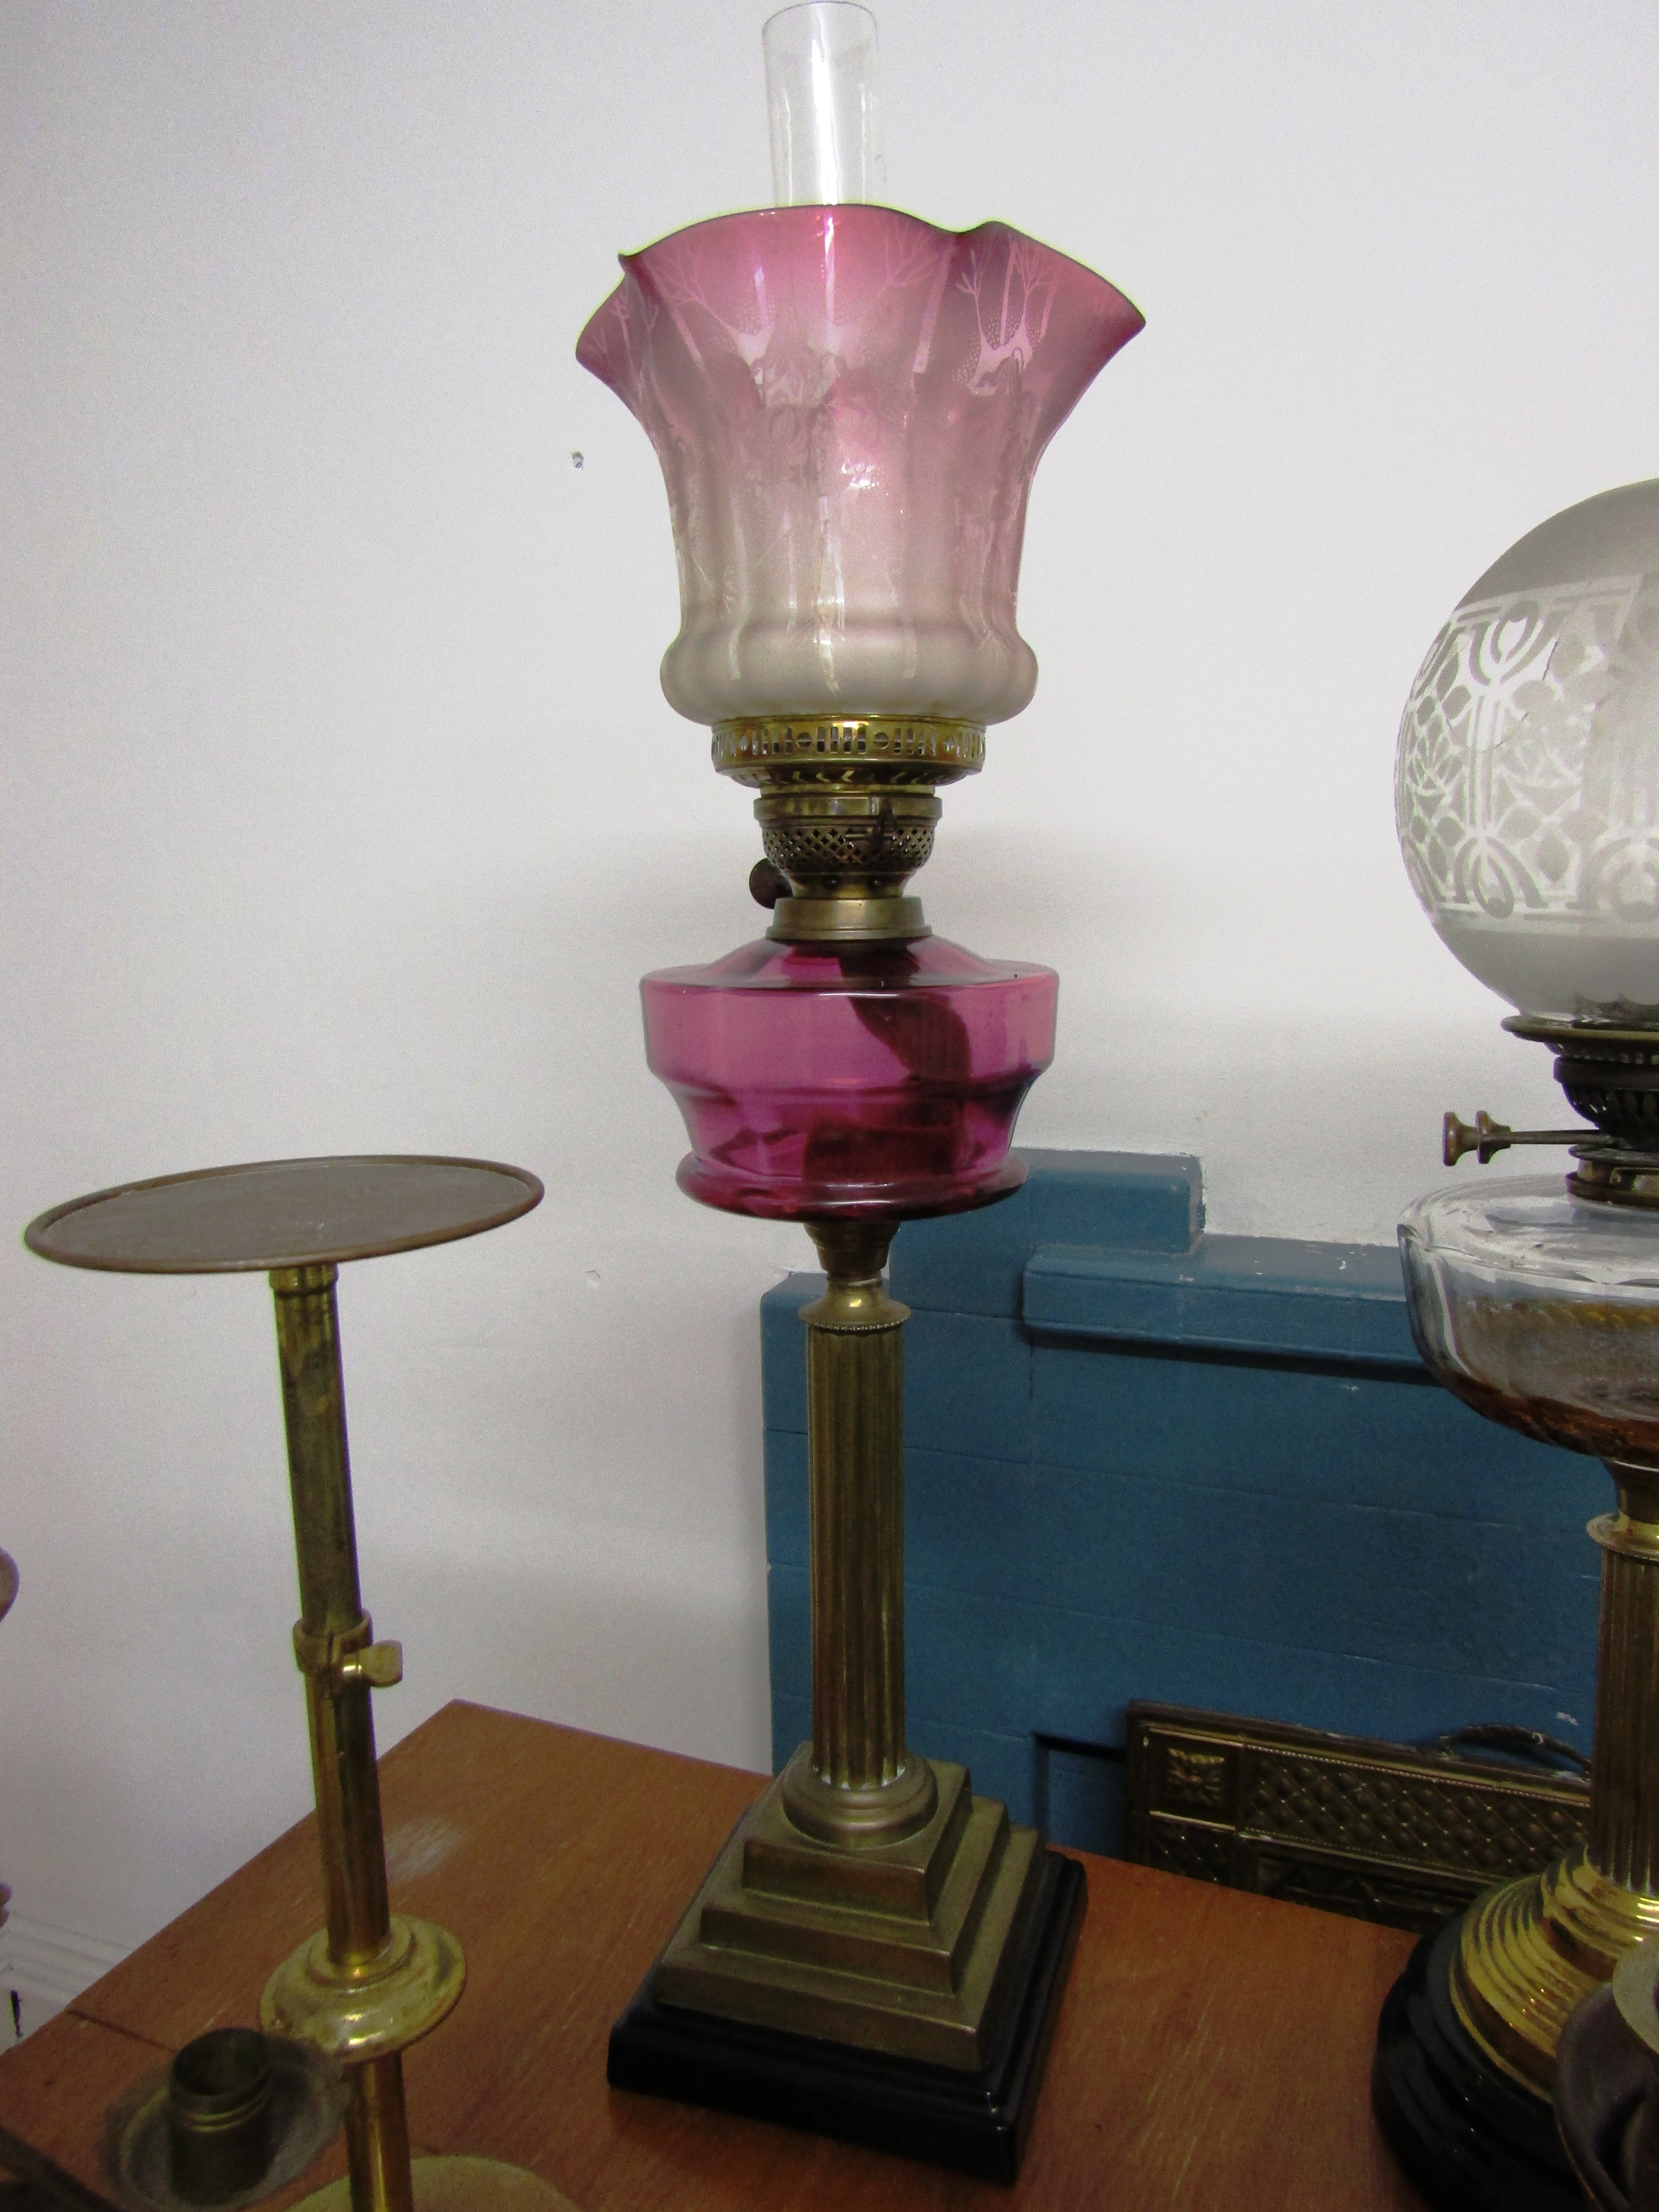 Victorian Brass Column Table Lamp with Etched Cranberry Shade 24 Inches High Approximately